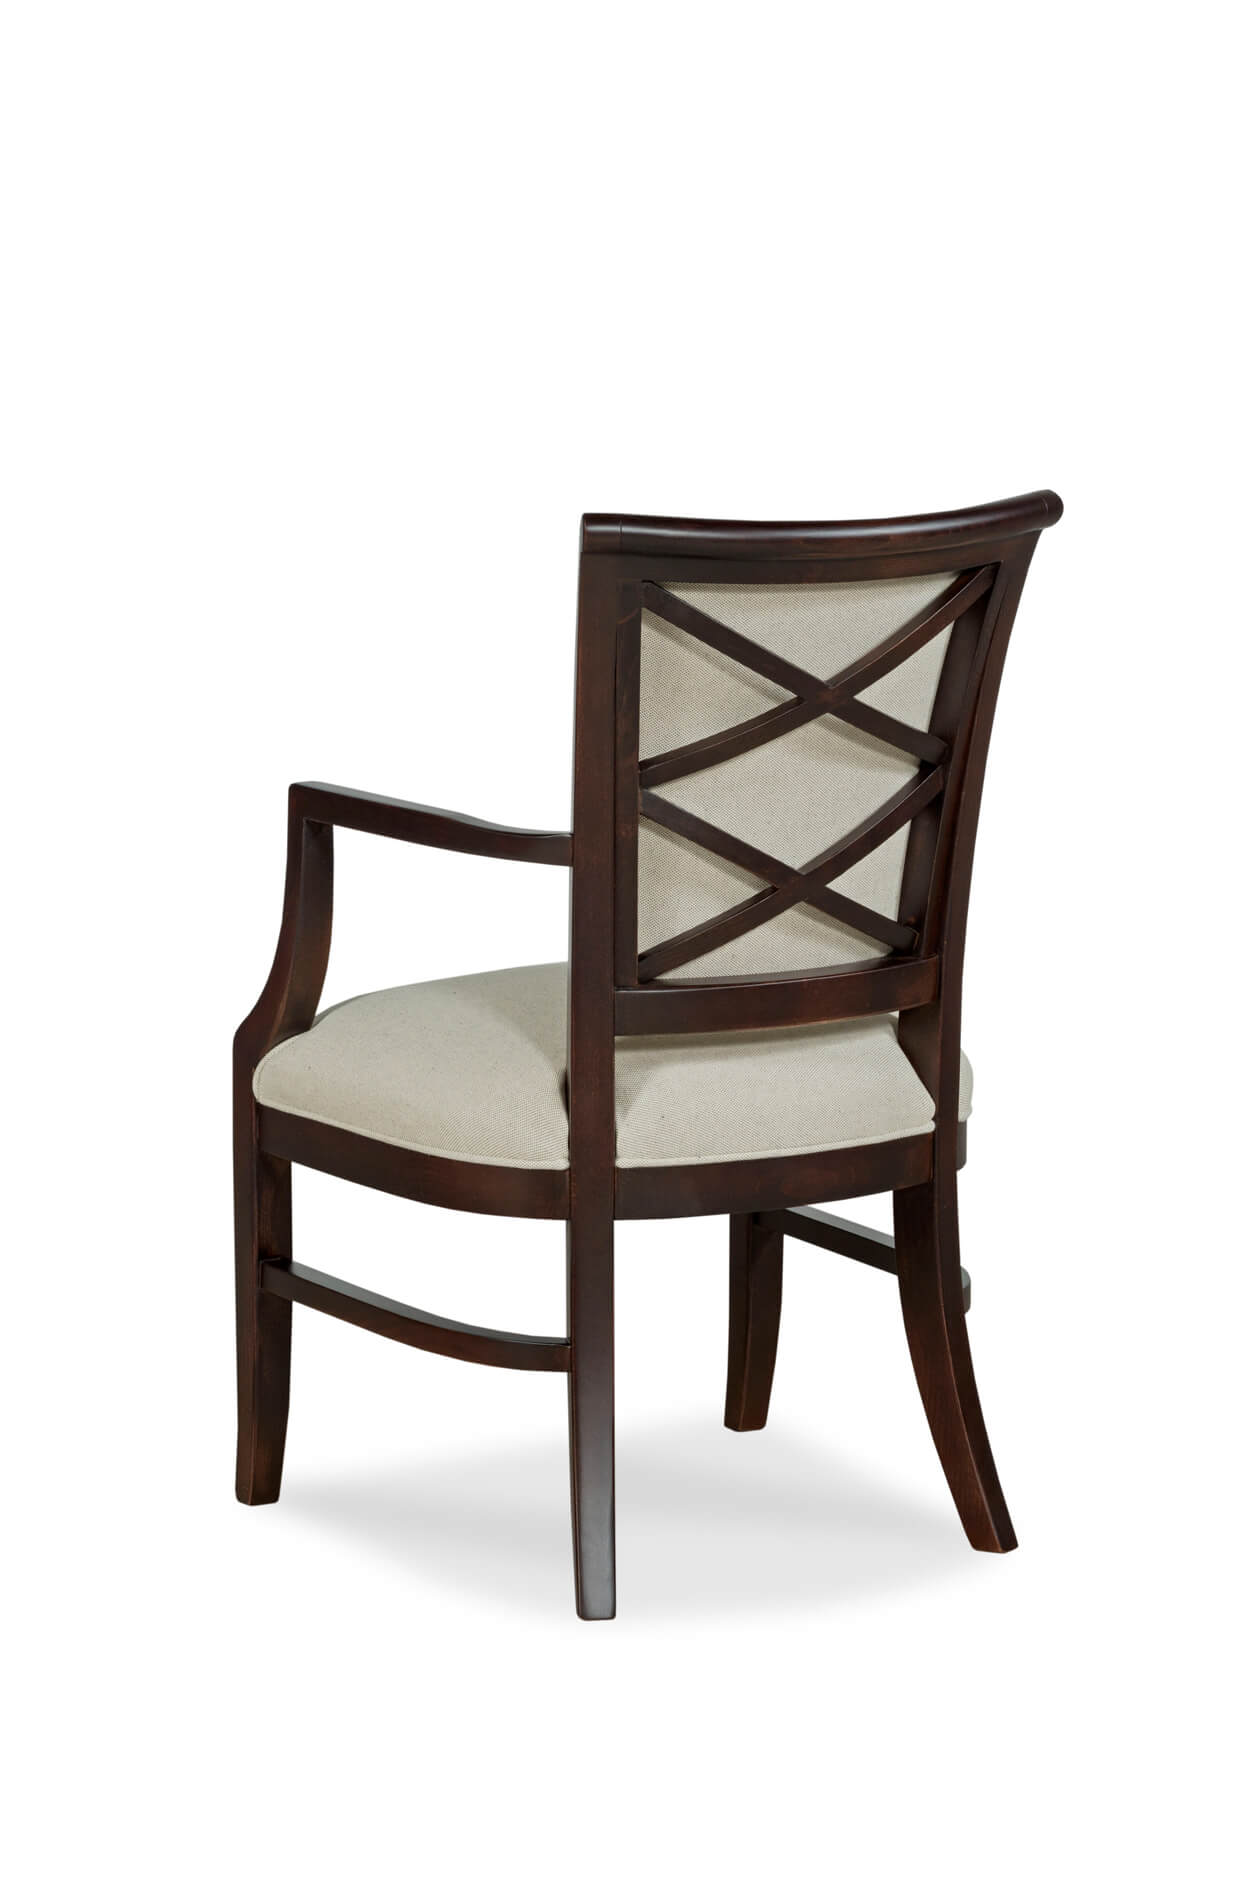 Buy Fairfield's Mackay Upholstered Dining Arm Chair - Free ...